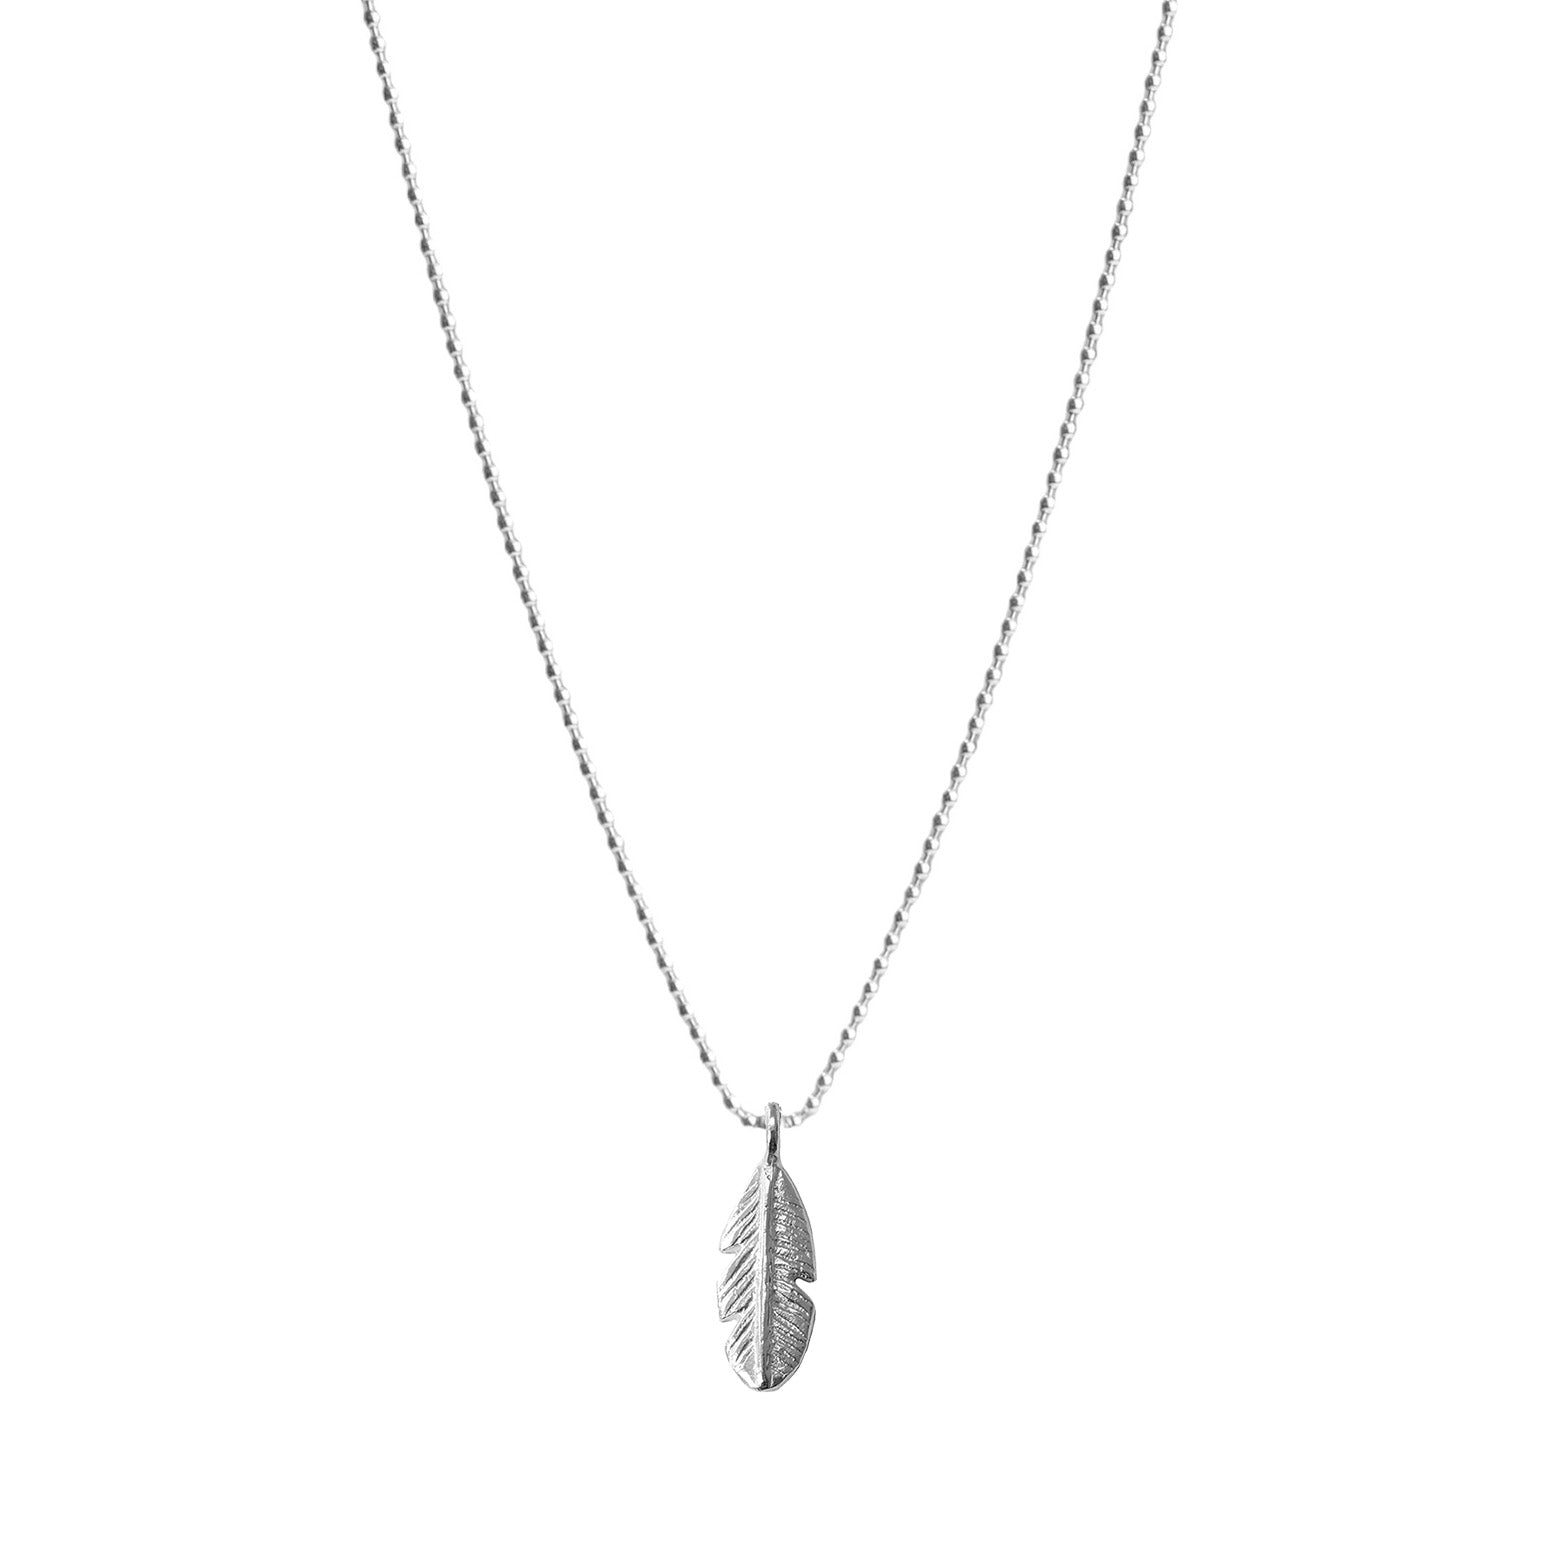 Belle & Bee Sterling silver ball chain feather necklace